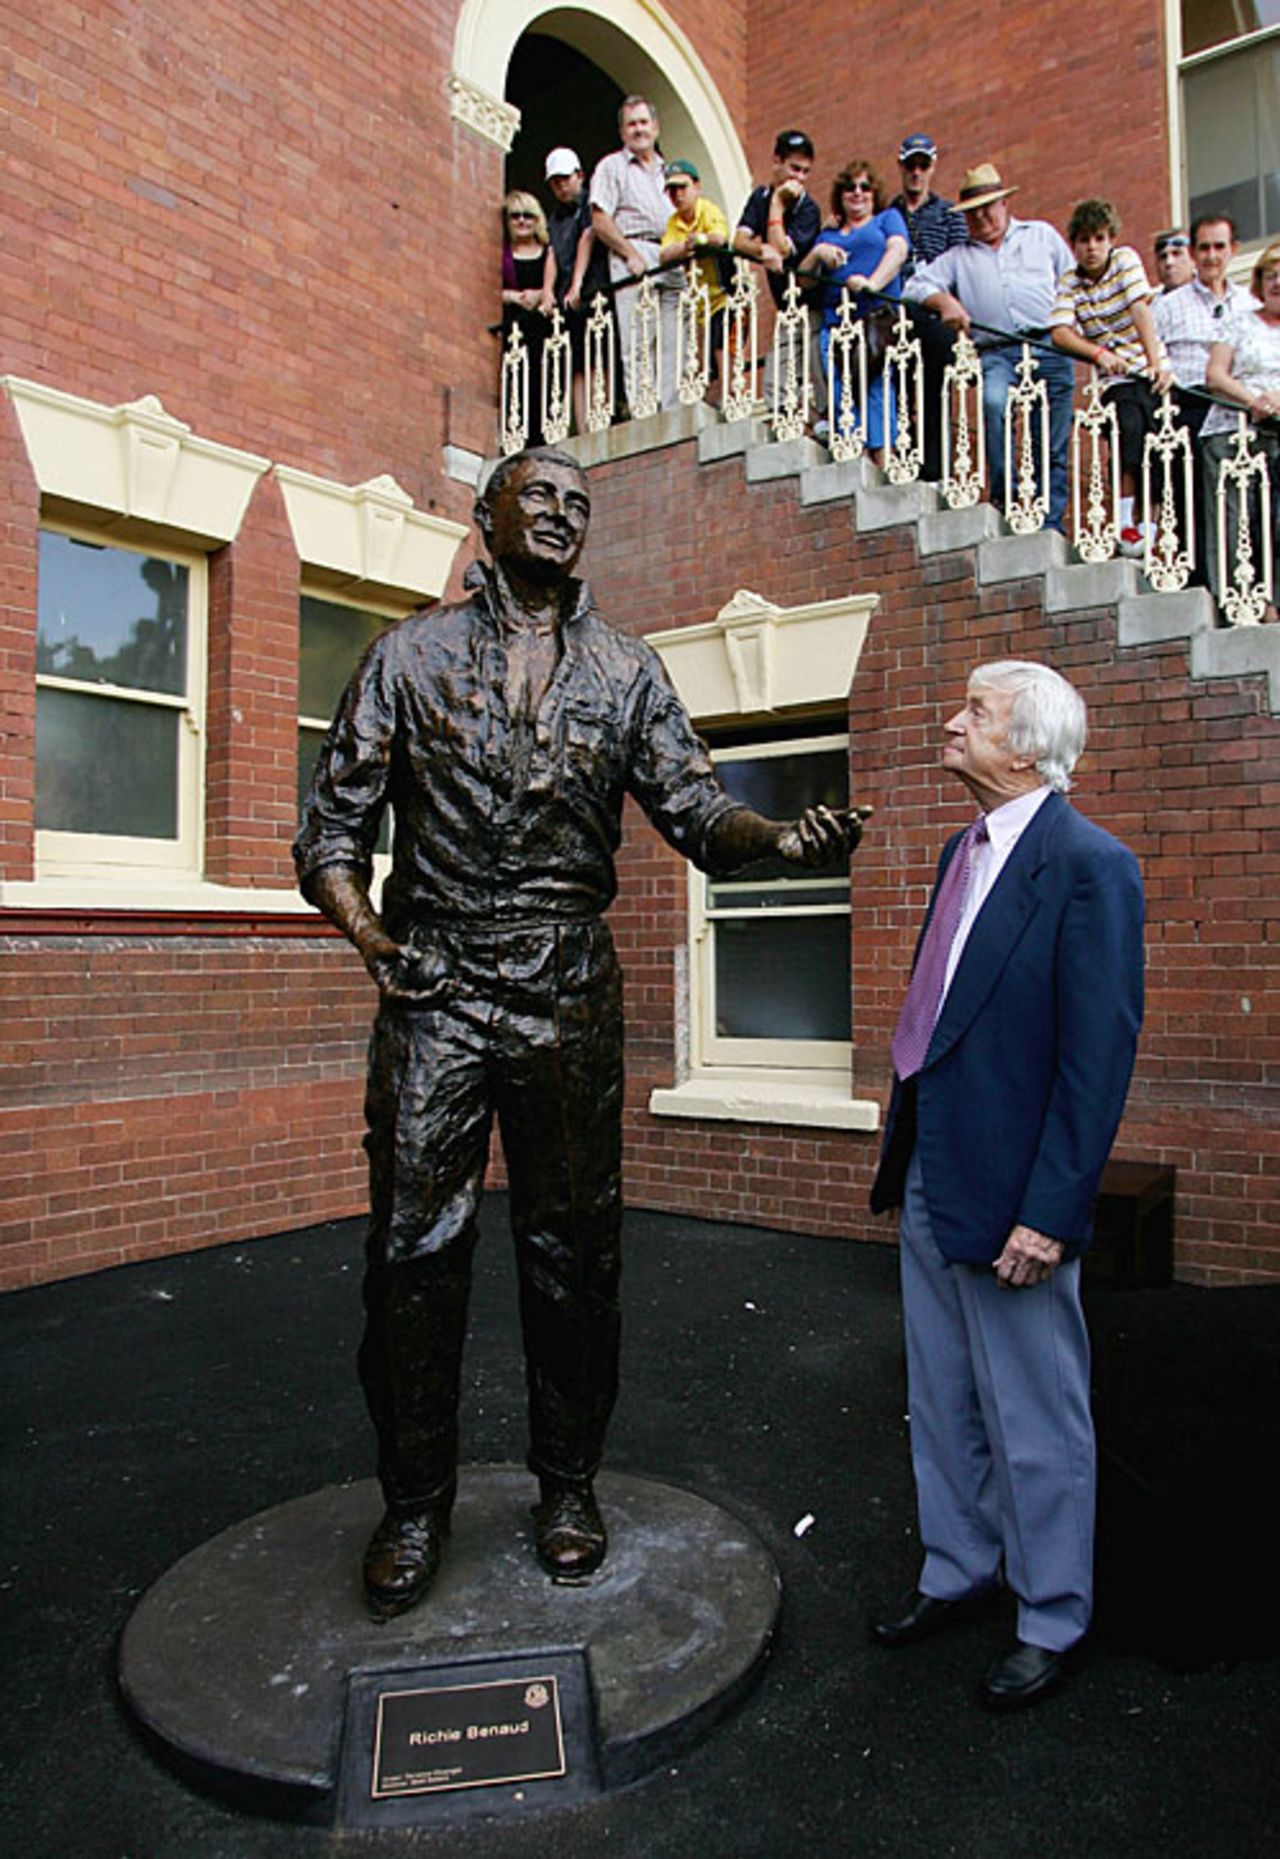 Richie Benaud stands next to a statue of himself at the SCG, Australia v India, 2nd Test, Sydney, 3rd day, January 4, 2008